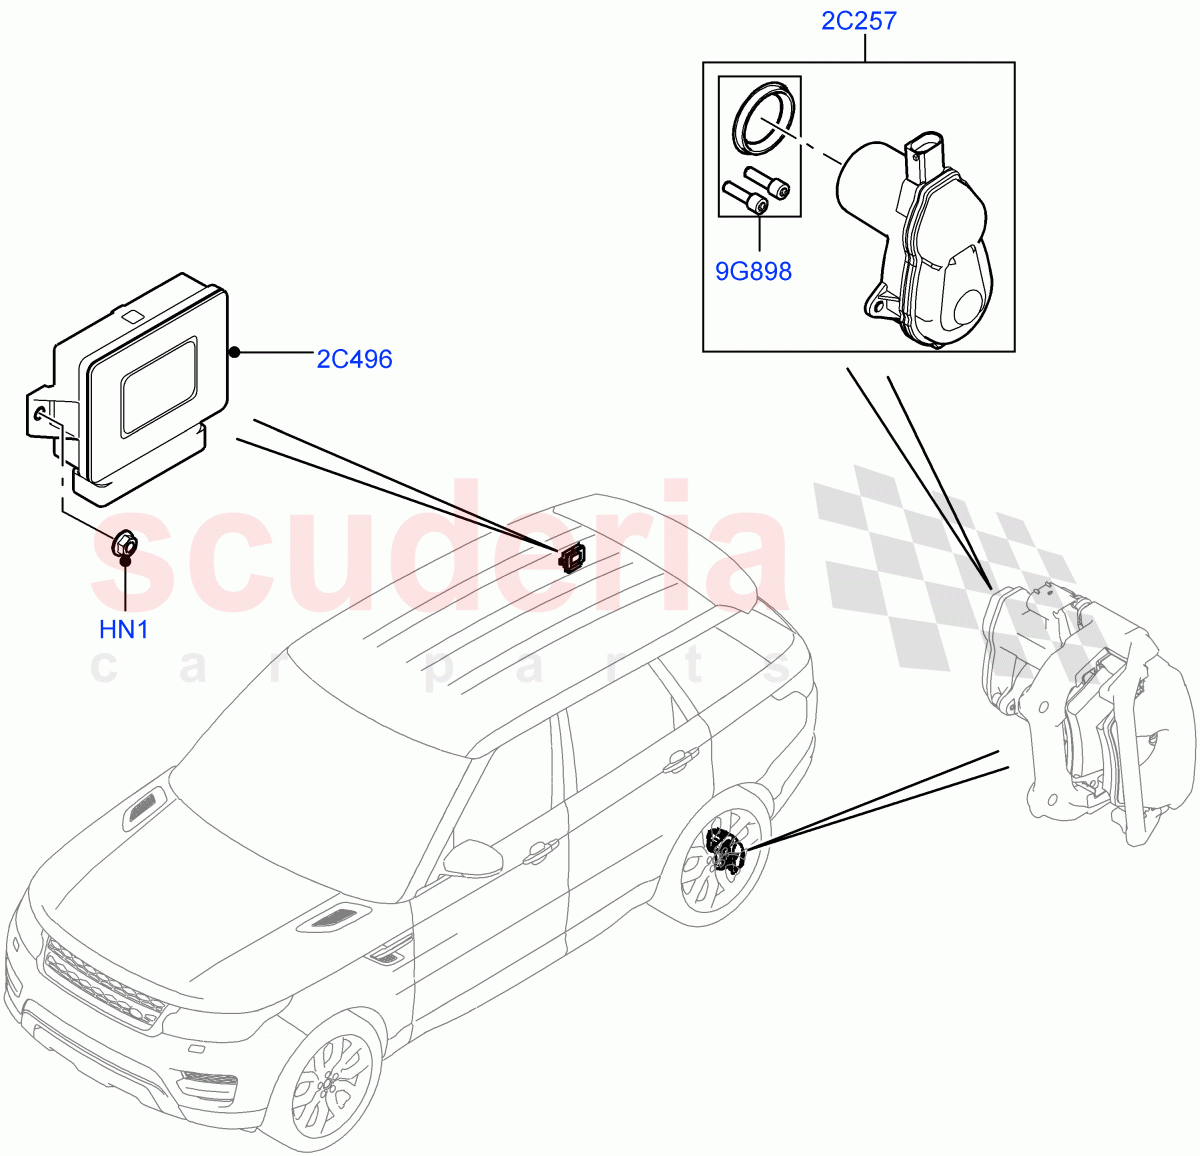 Parking Brake(Electric Parking Brake Actuator And Cables) of Land Rover Land Rover Range Rover Sport (2014+) [5.0 OHC SGDI SC V8 Petrol]